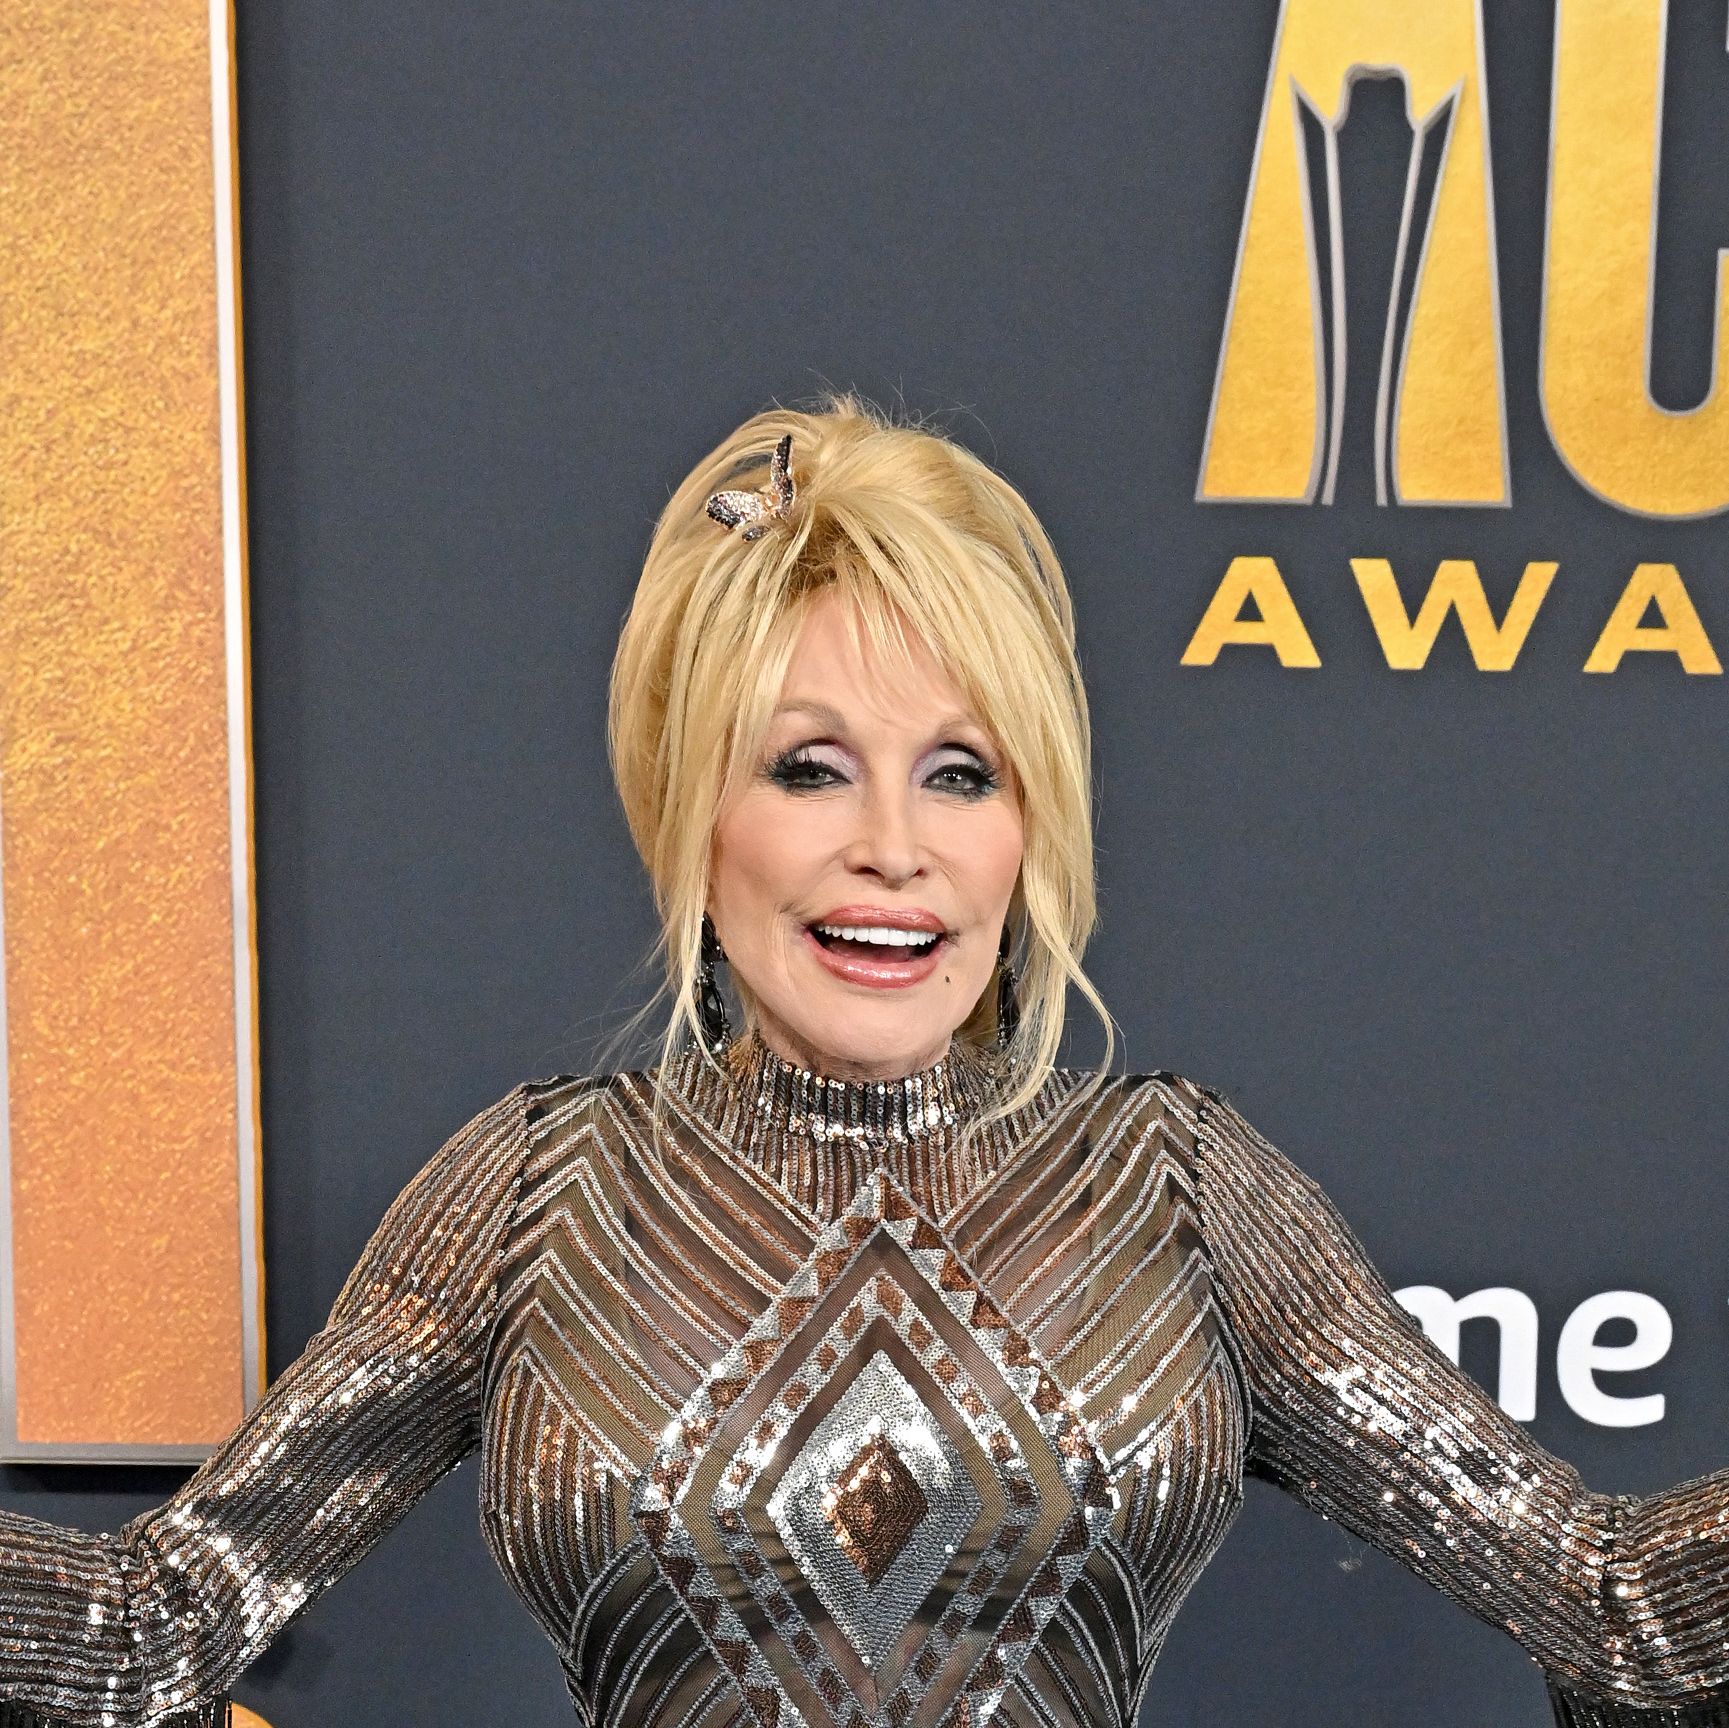 Dolly Parton, 76, Reveals Her Biggest Skincare Secret for a Flawless Complexion